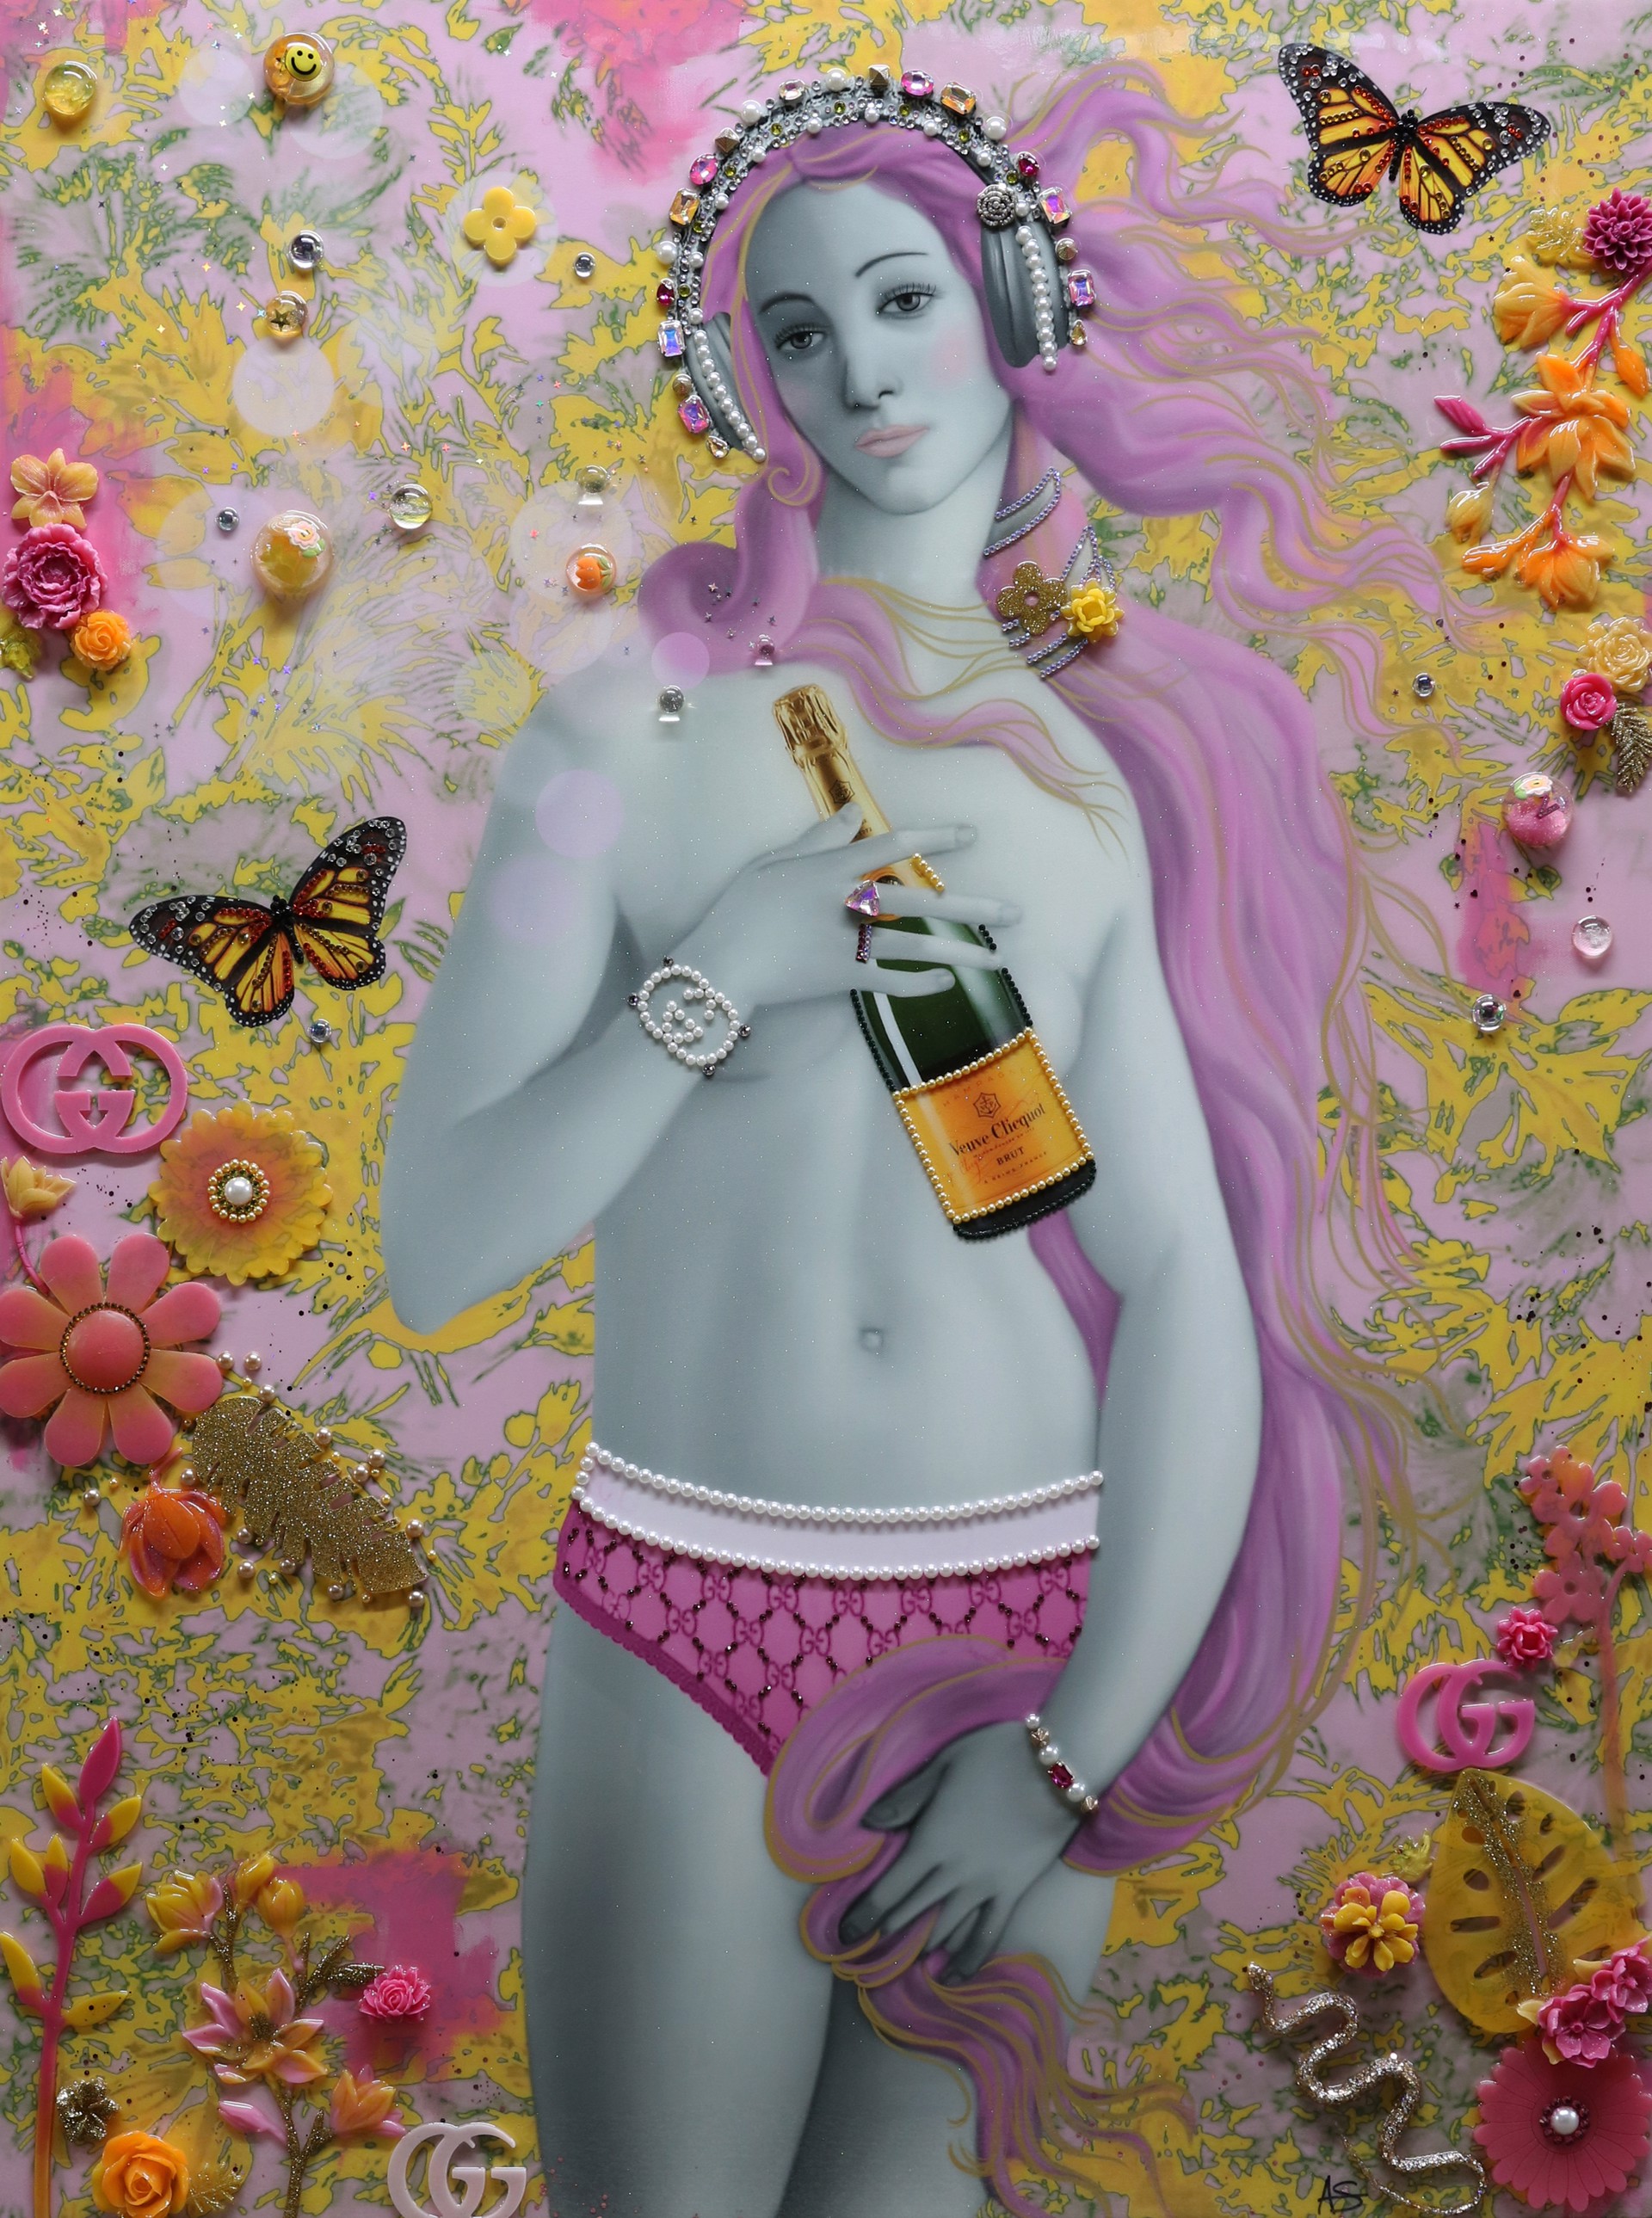 Champagne All Day (Venus) by Amy Shekhter